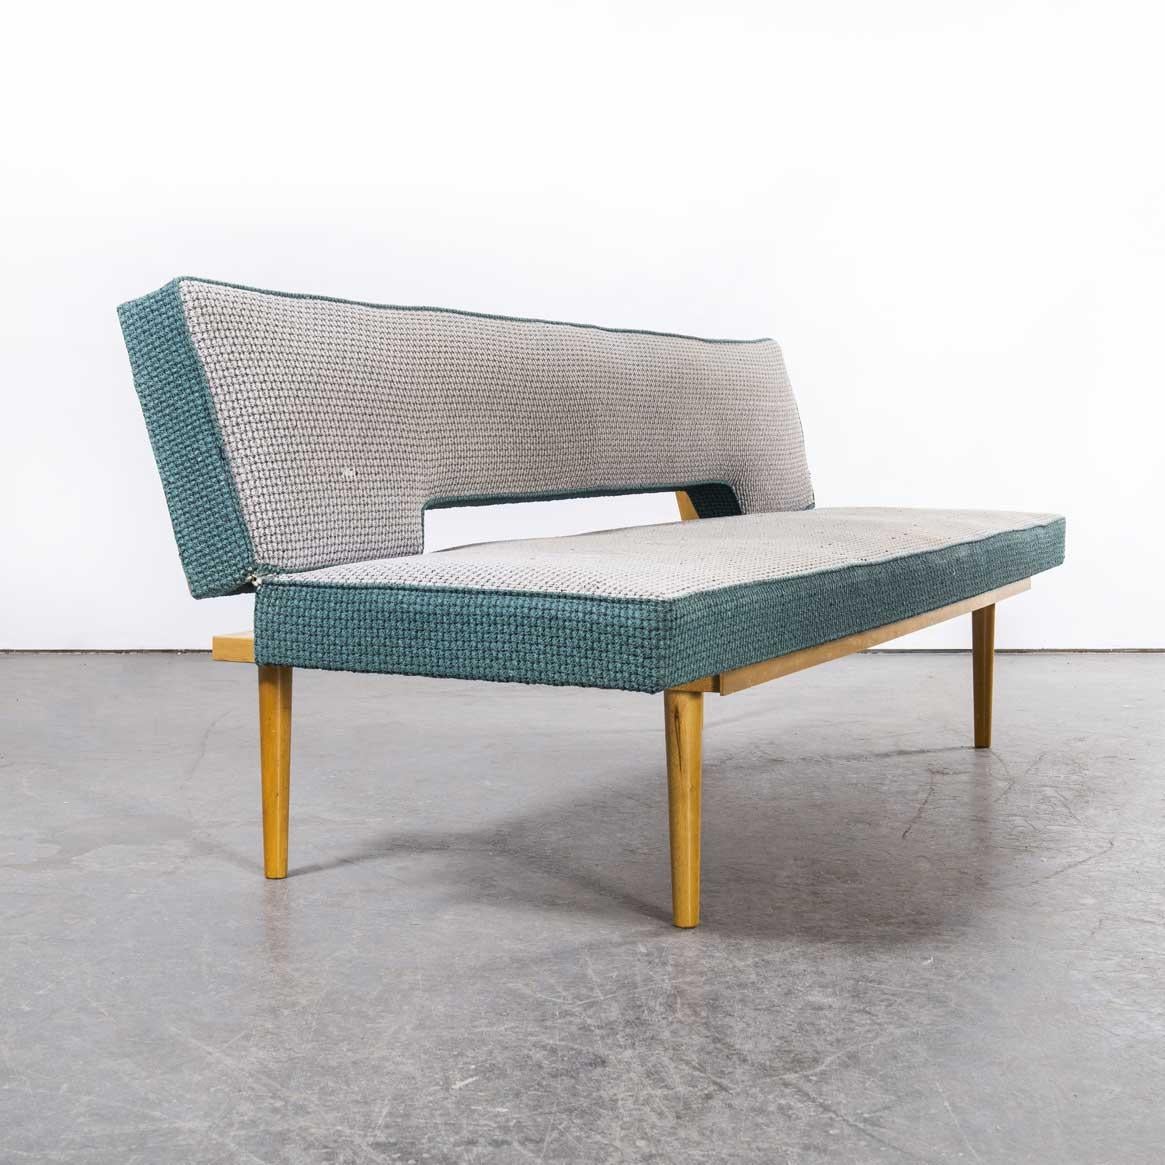 1950’s Original Mid Century Sofa – Daybed By Miroslav Navratil – Interieur Praha
1970’s Original Mid Century Sofa – Daybed By Miroslav Navratil – Interieur Praha. Beautiful simple and classic mid century daybed sourced in the Czech Republic. The